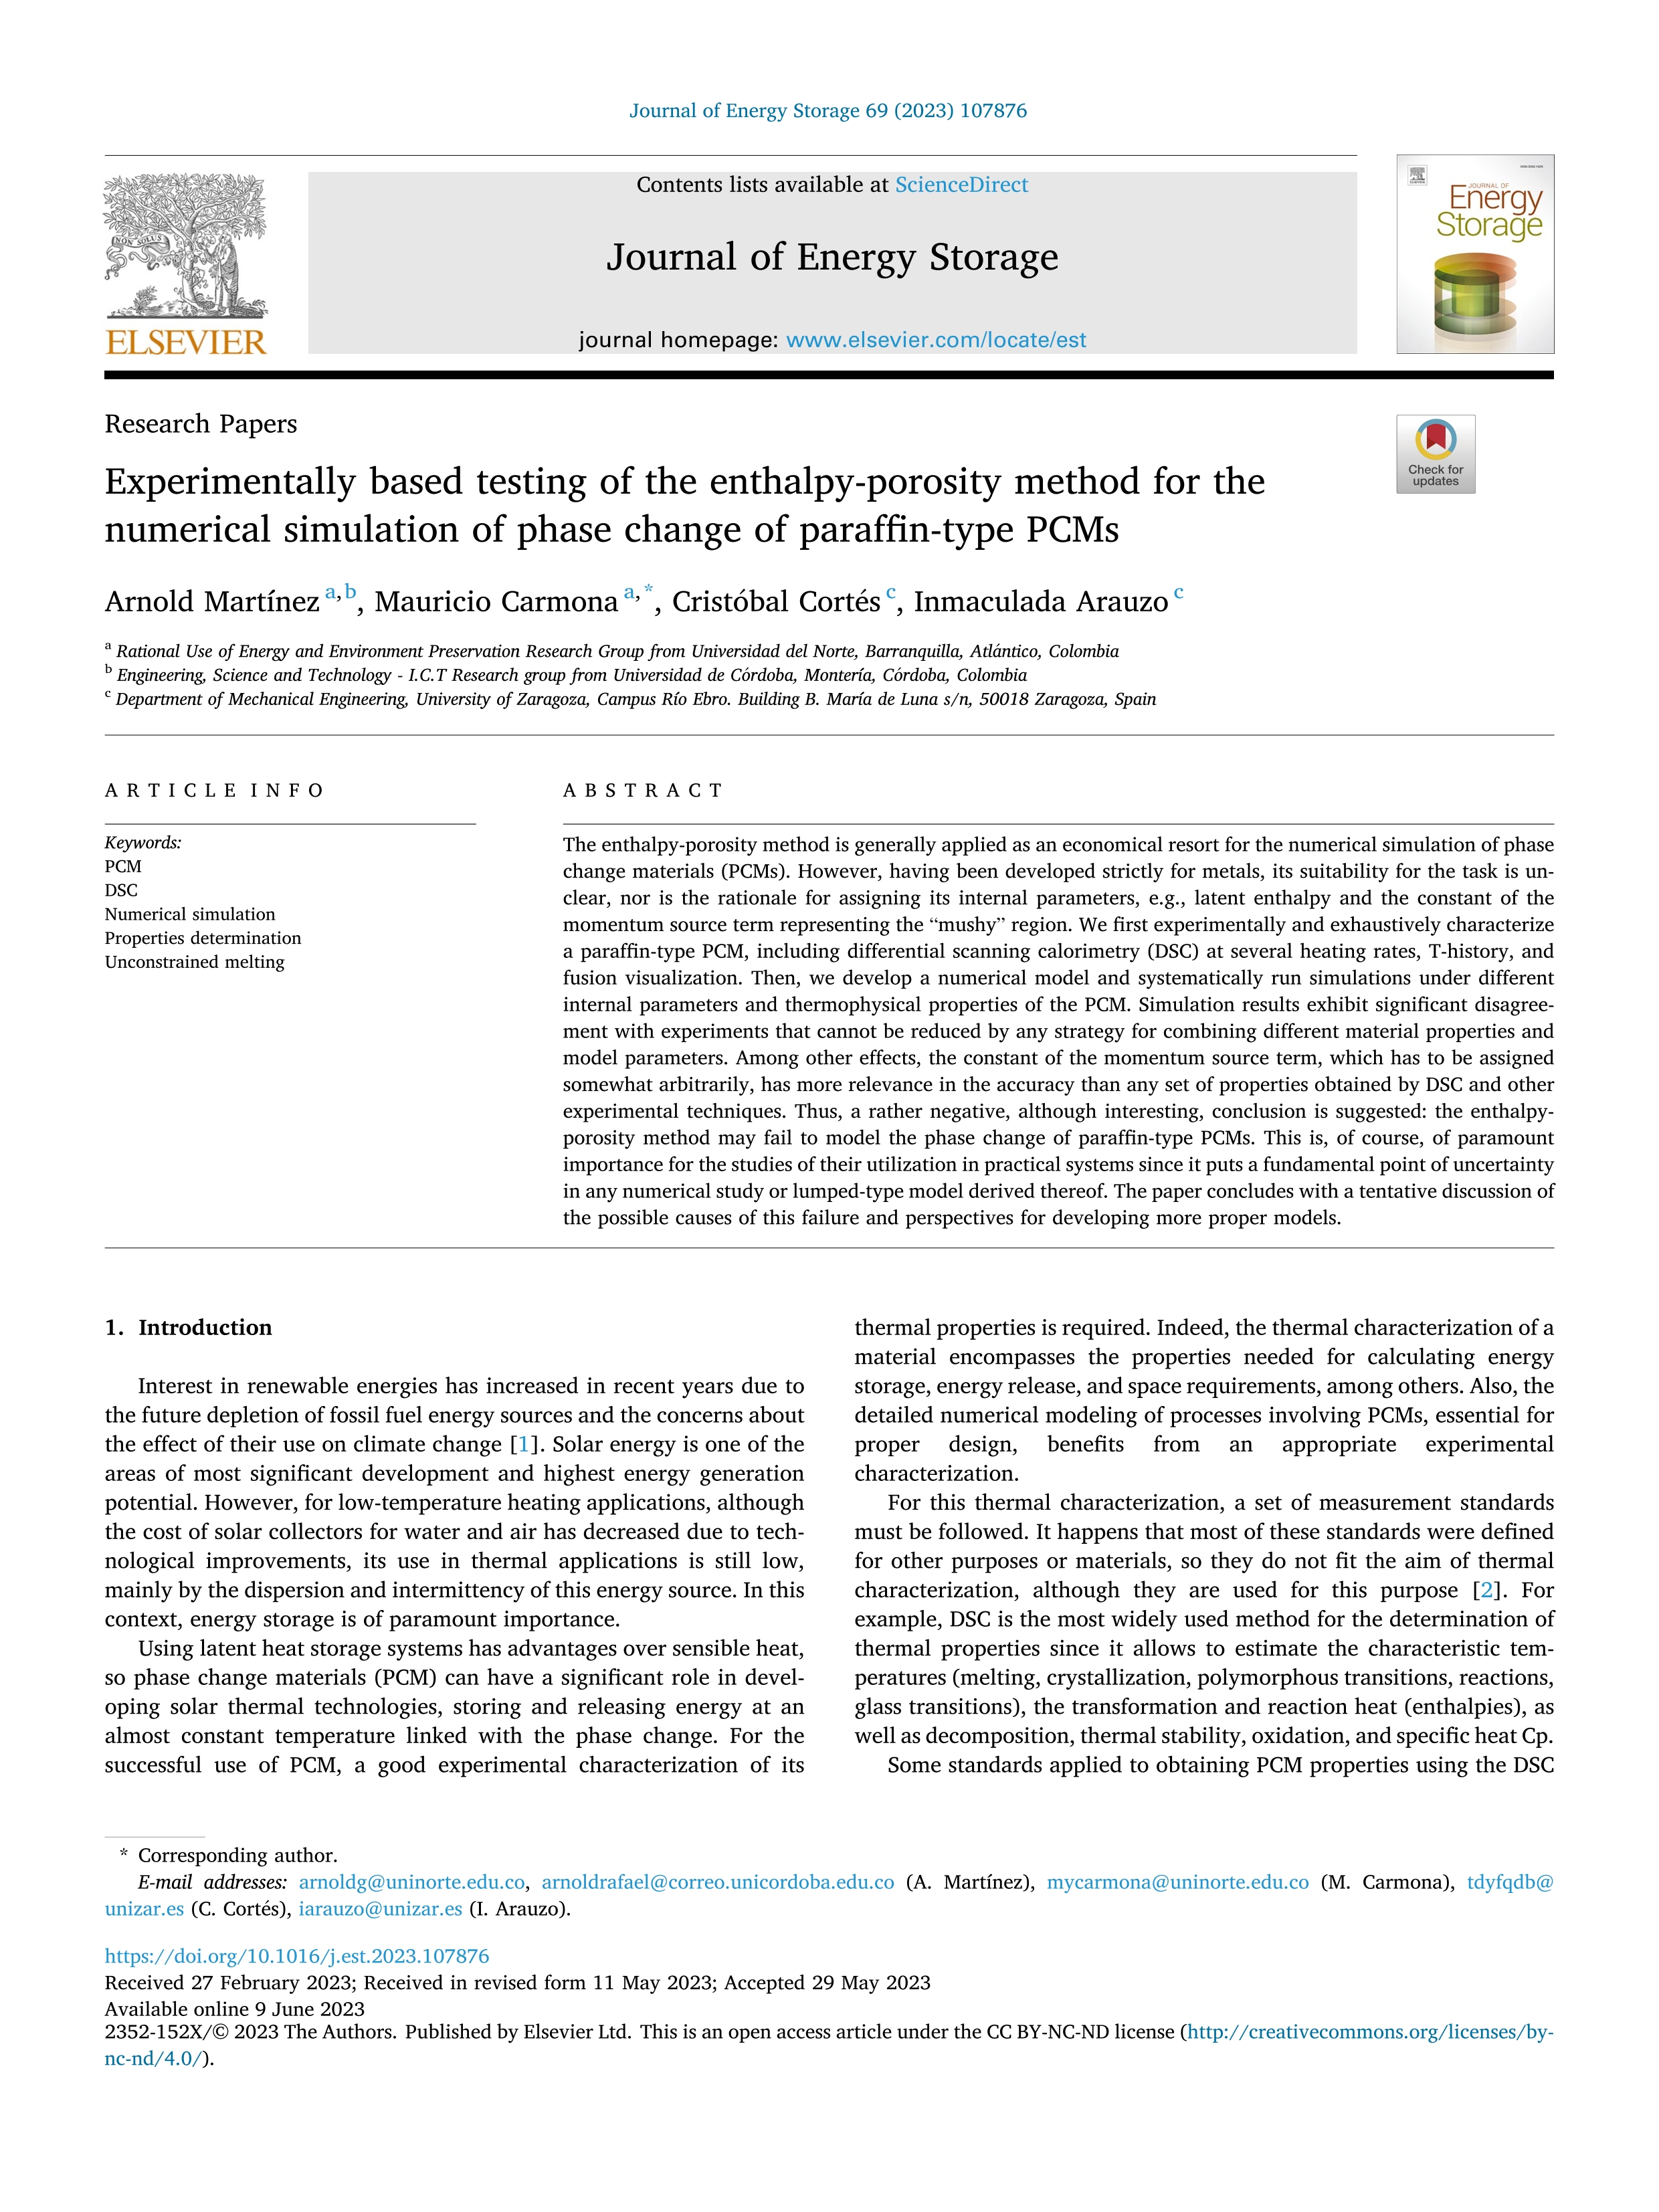 Experimentally based testing of the enthalpy-porosity method for the numerical simulation of phase change of paraffin-type PCMs